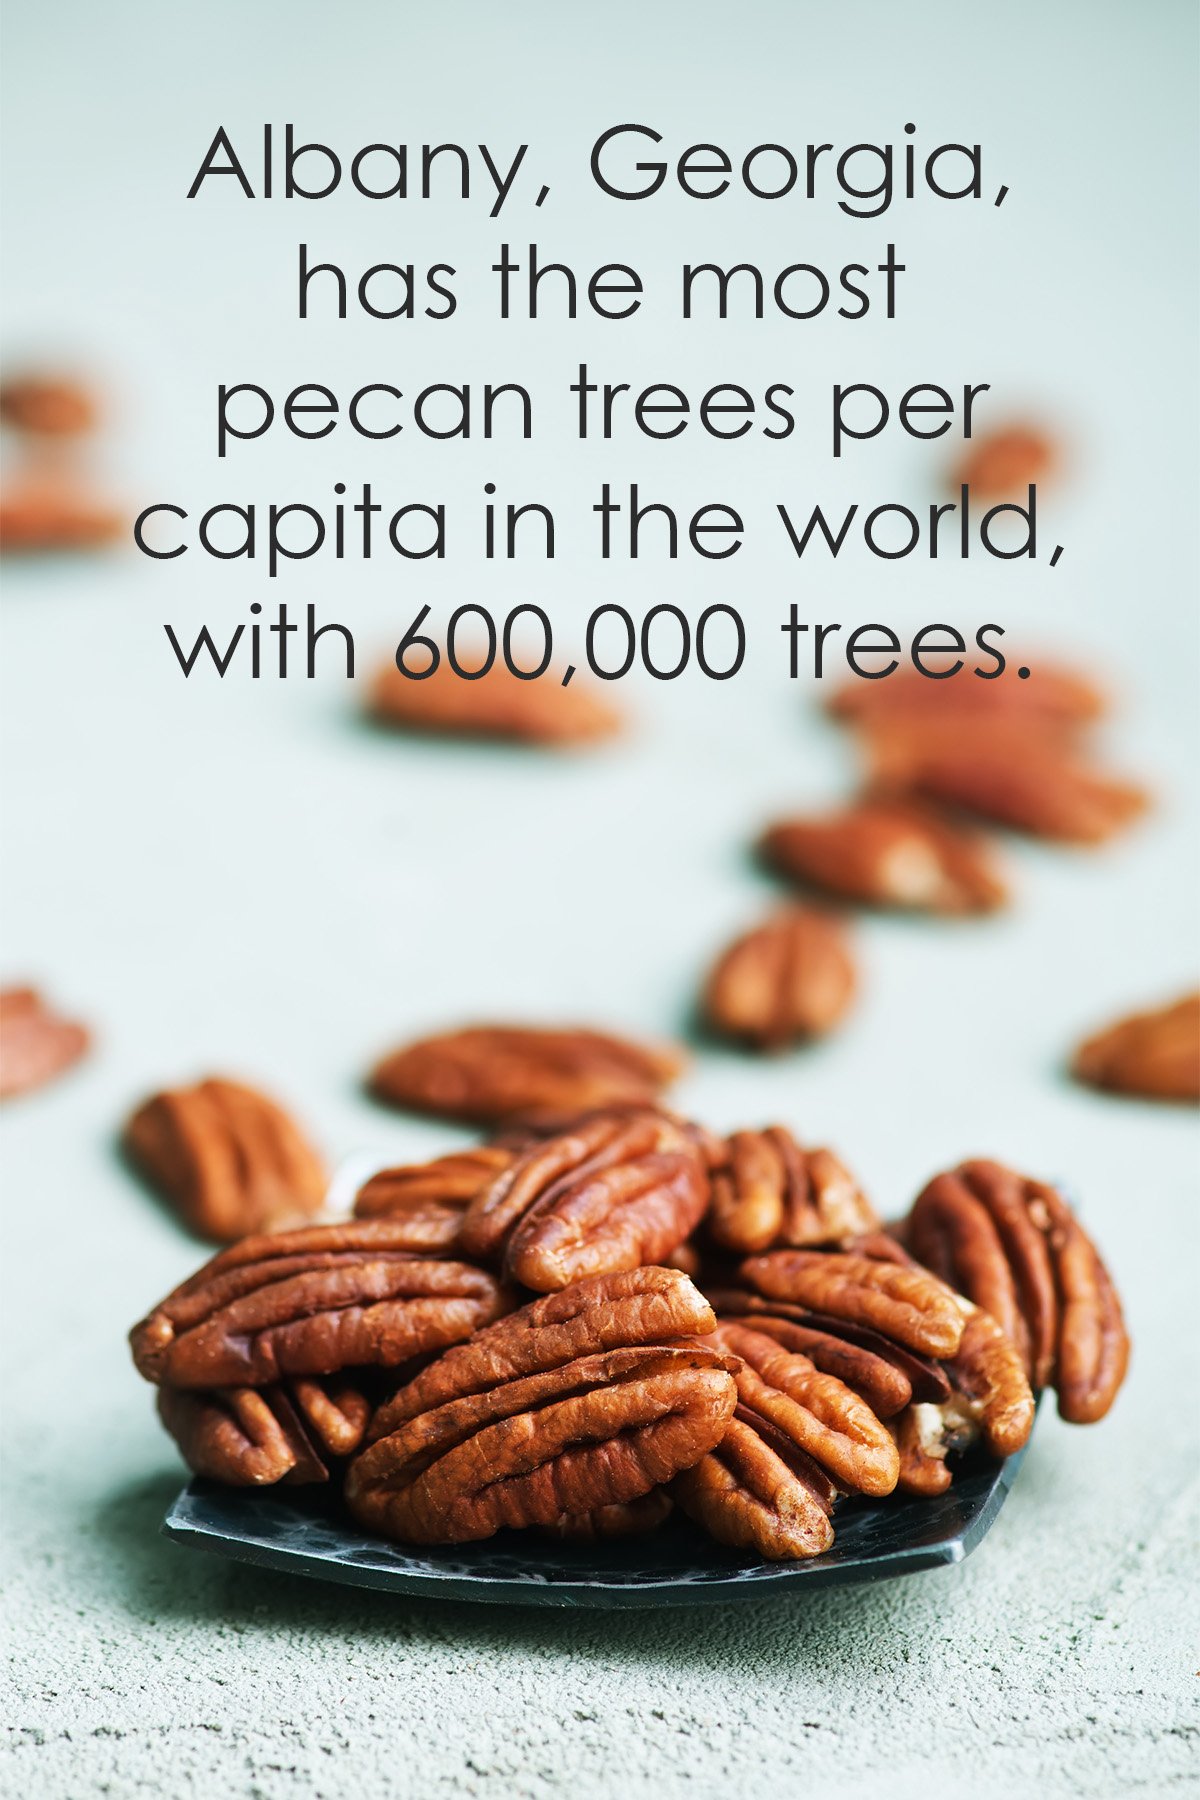 where do pecans grow the most